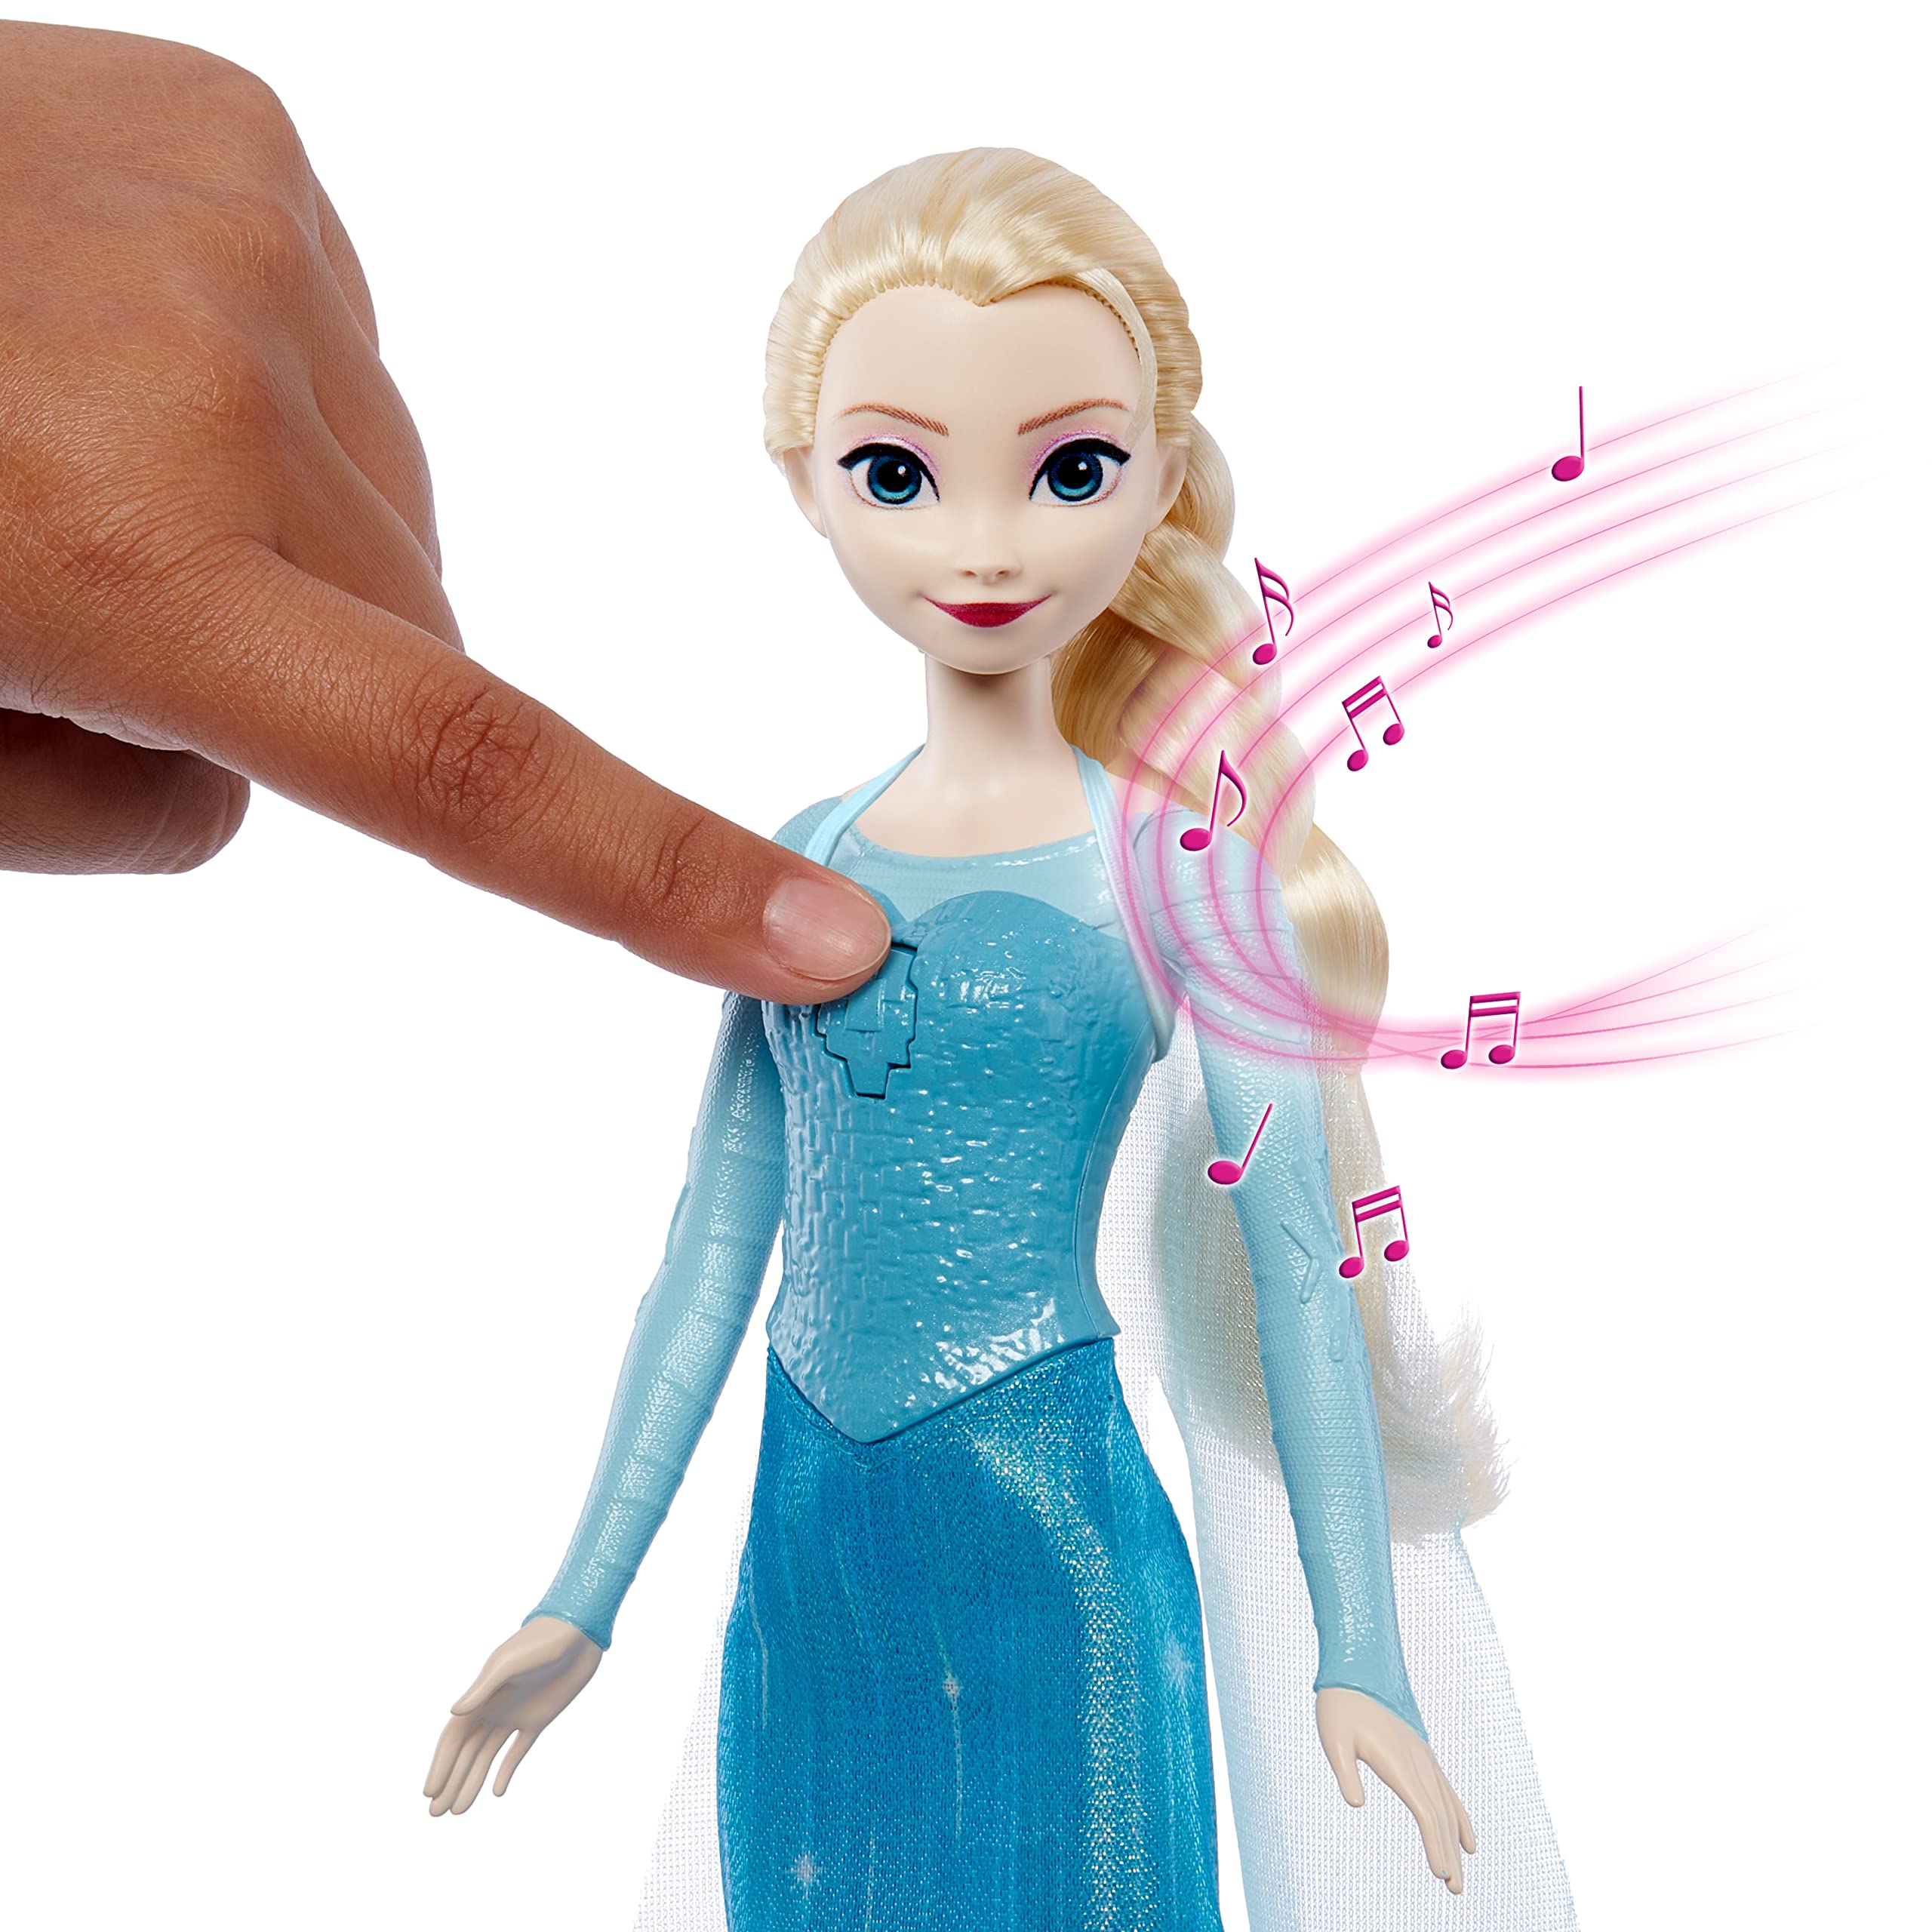 Disney Frozen Toys, Singing Elsa Doll in Signature Clothing, Sings “Let It Go” from the Disney Movie Frozen